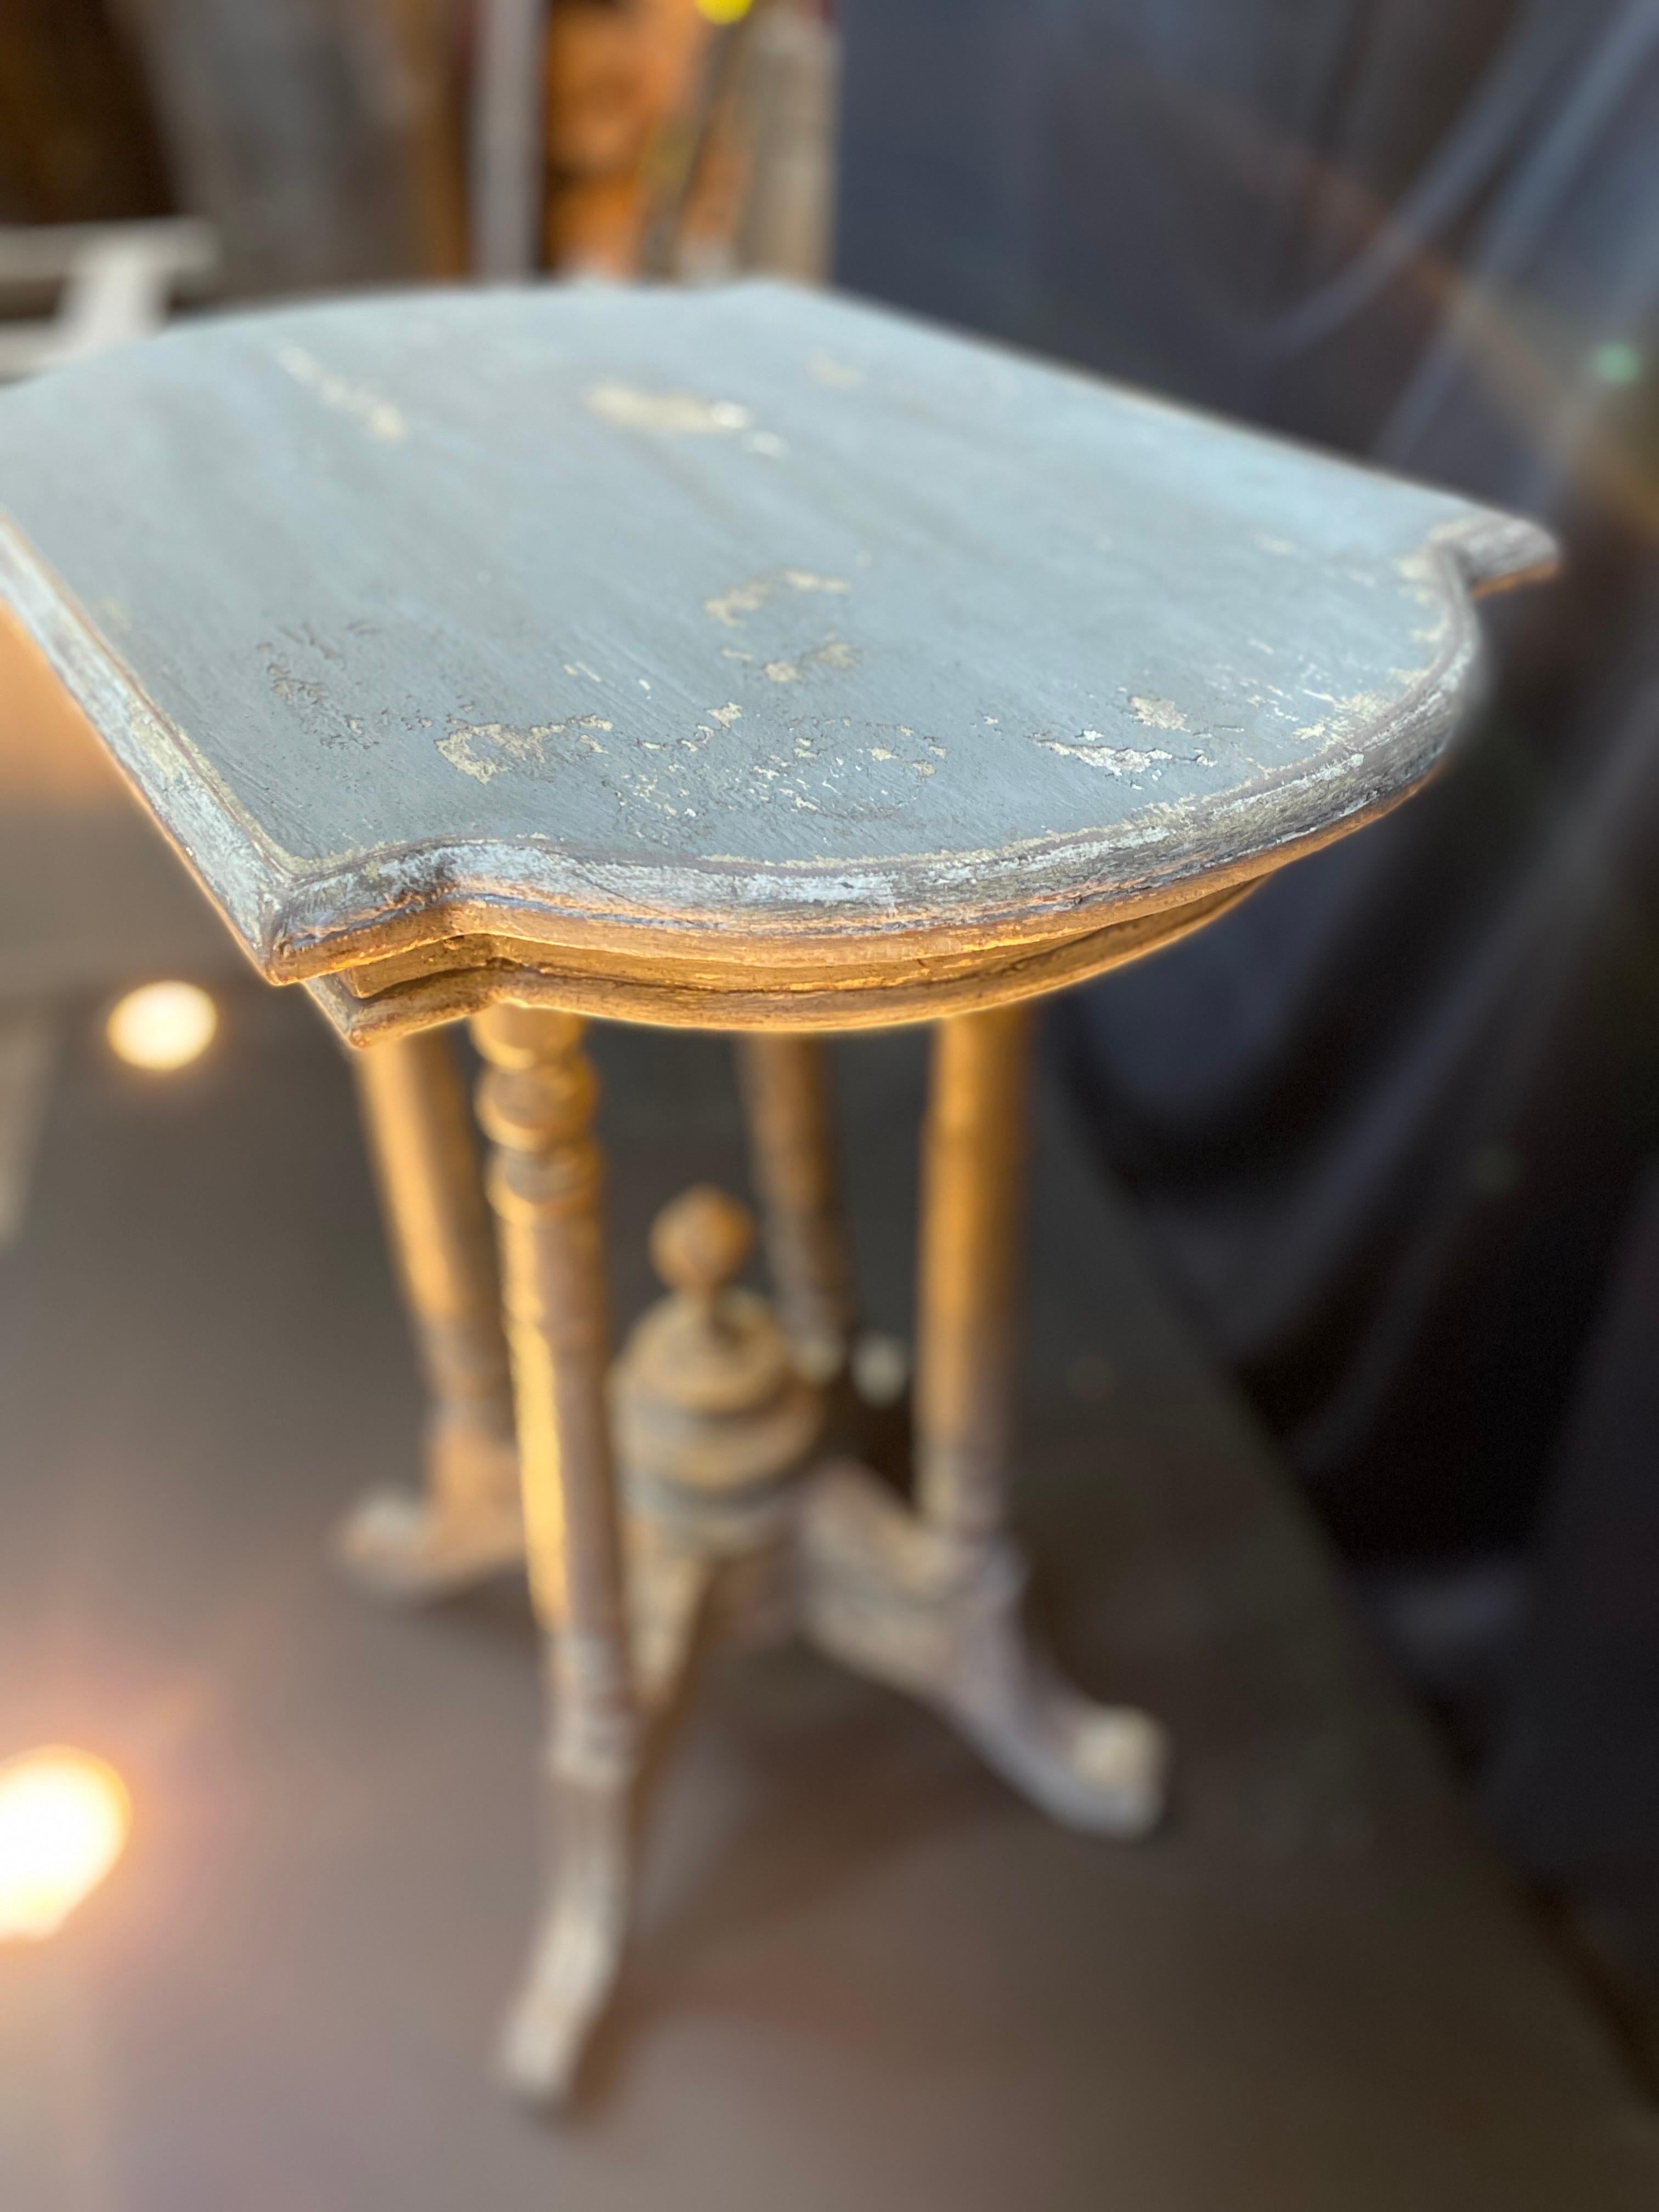 Napoleon III Napoléon iii pedestal table with patina dating from the 19th century  For Sale